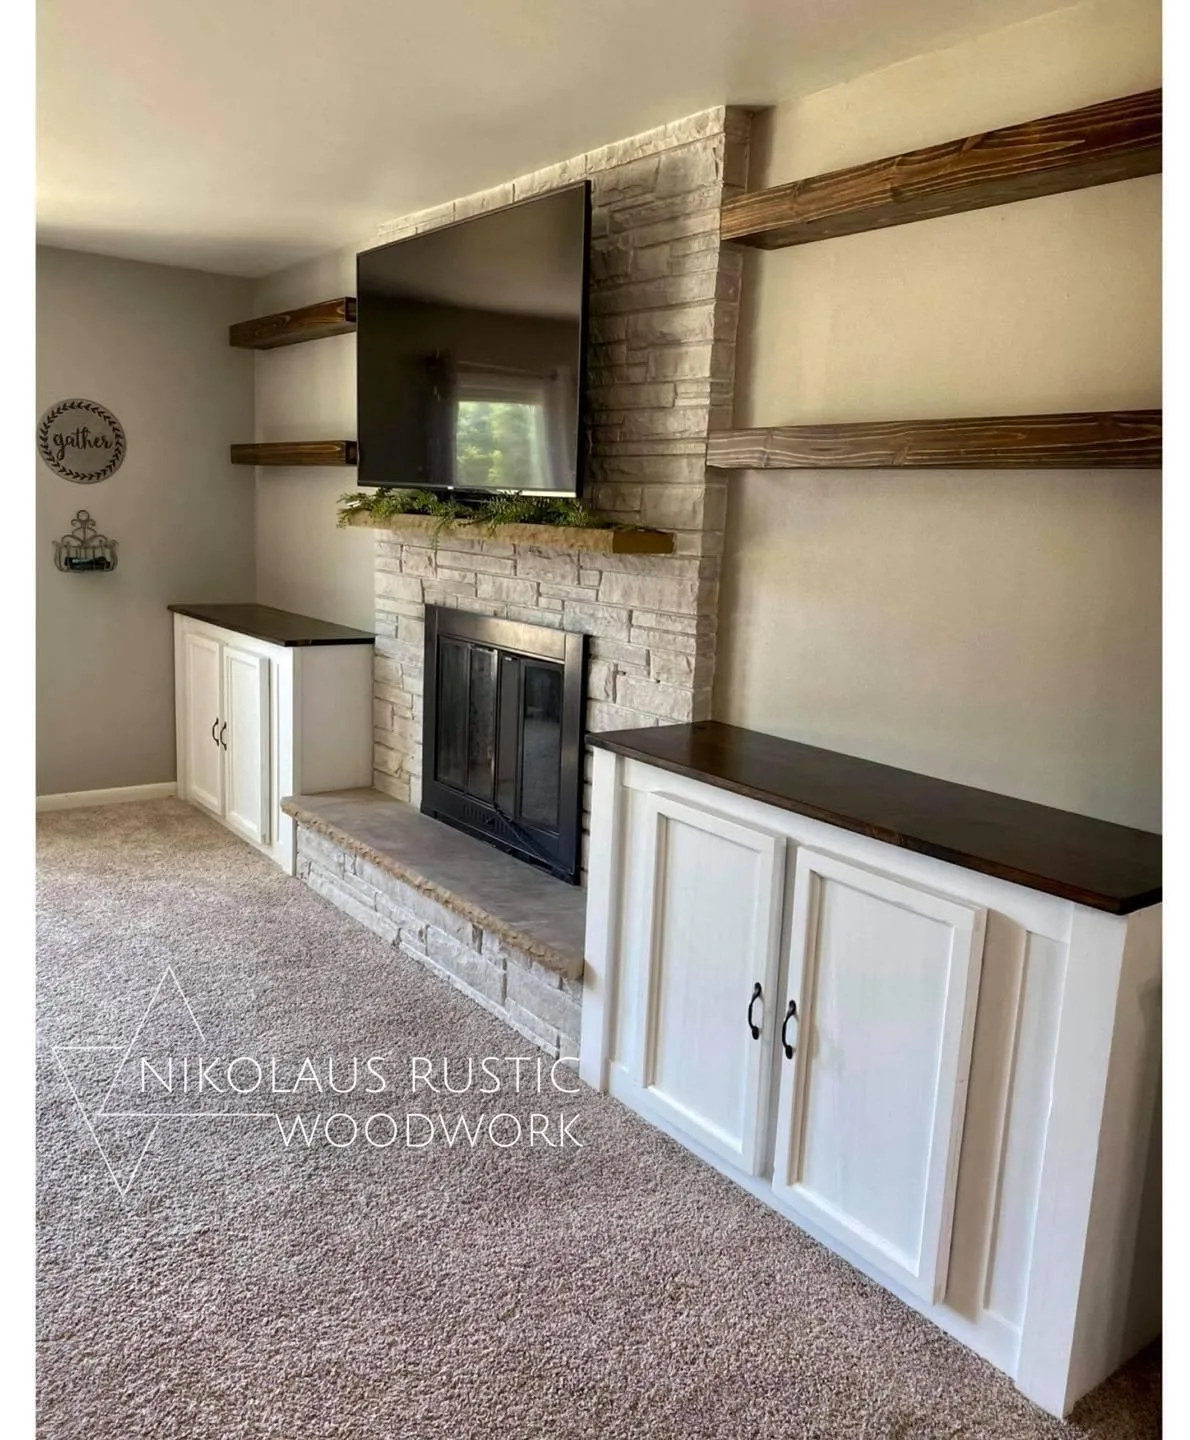 Nikolaus Rustic Woodwork built-in cabinets & shelving surrounding fireplace - rustic mantle 